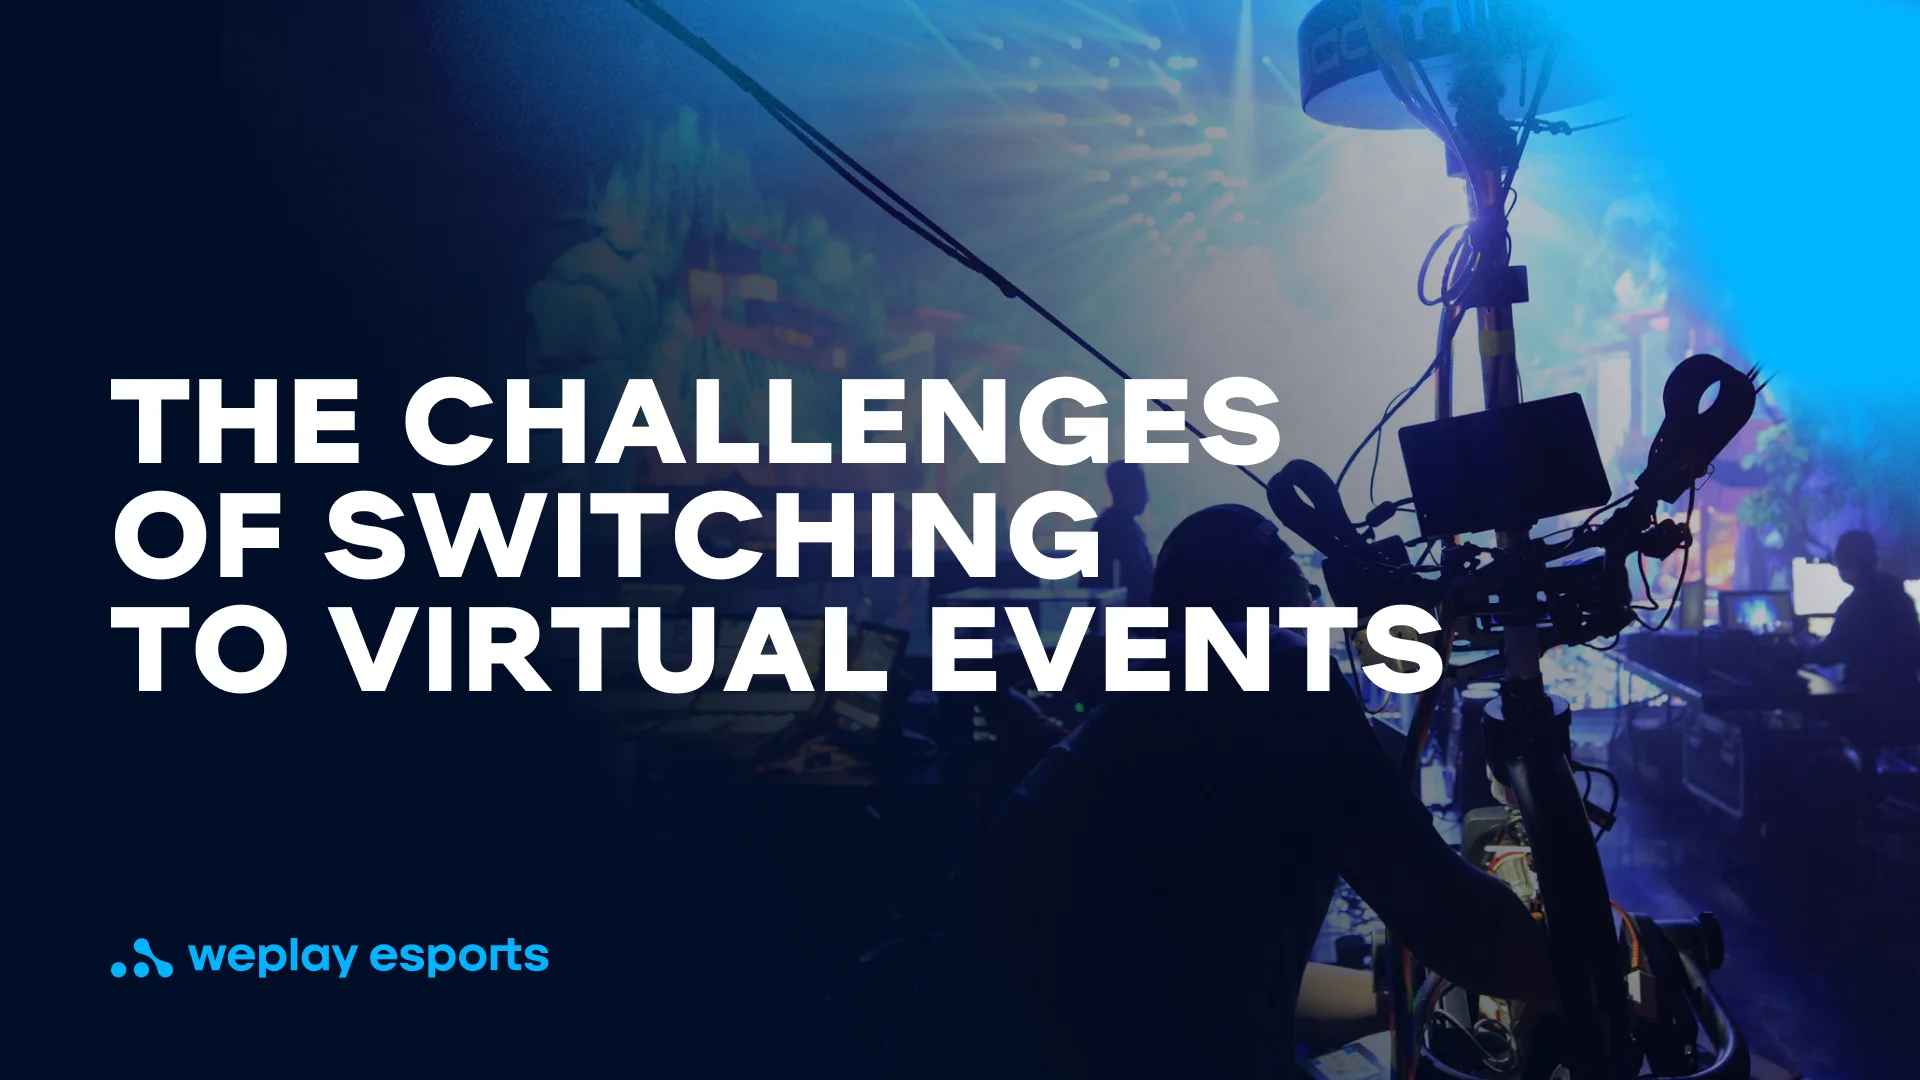 The challenges of switching to virtual events. Credit: WePlay Holding